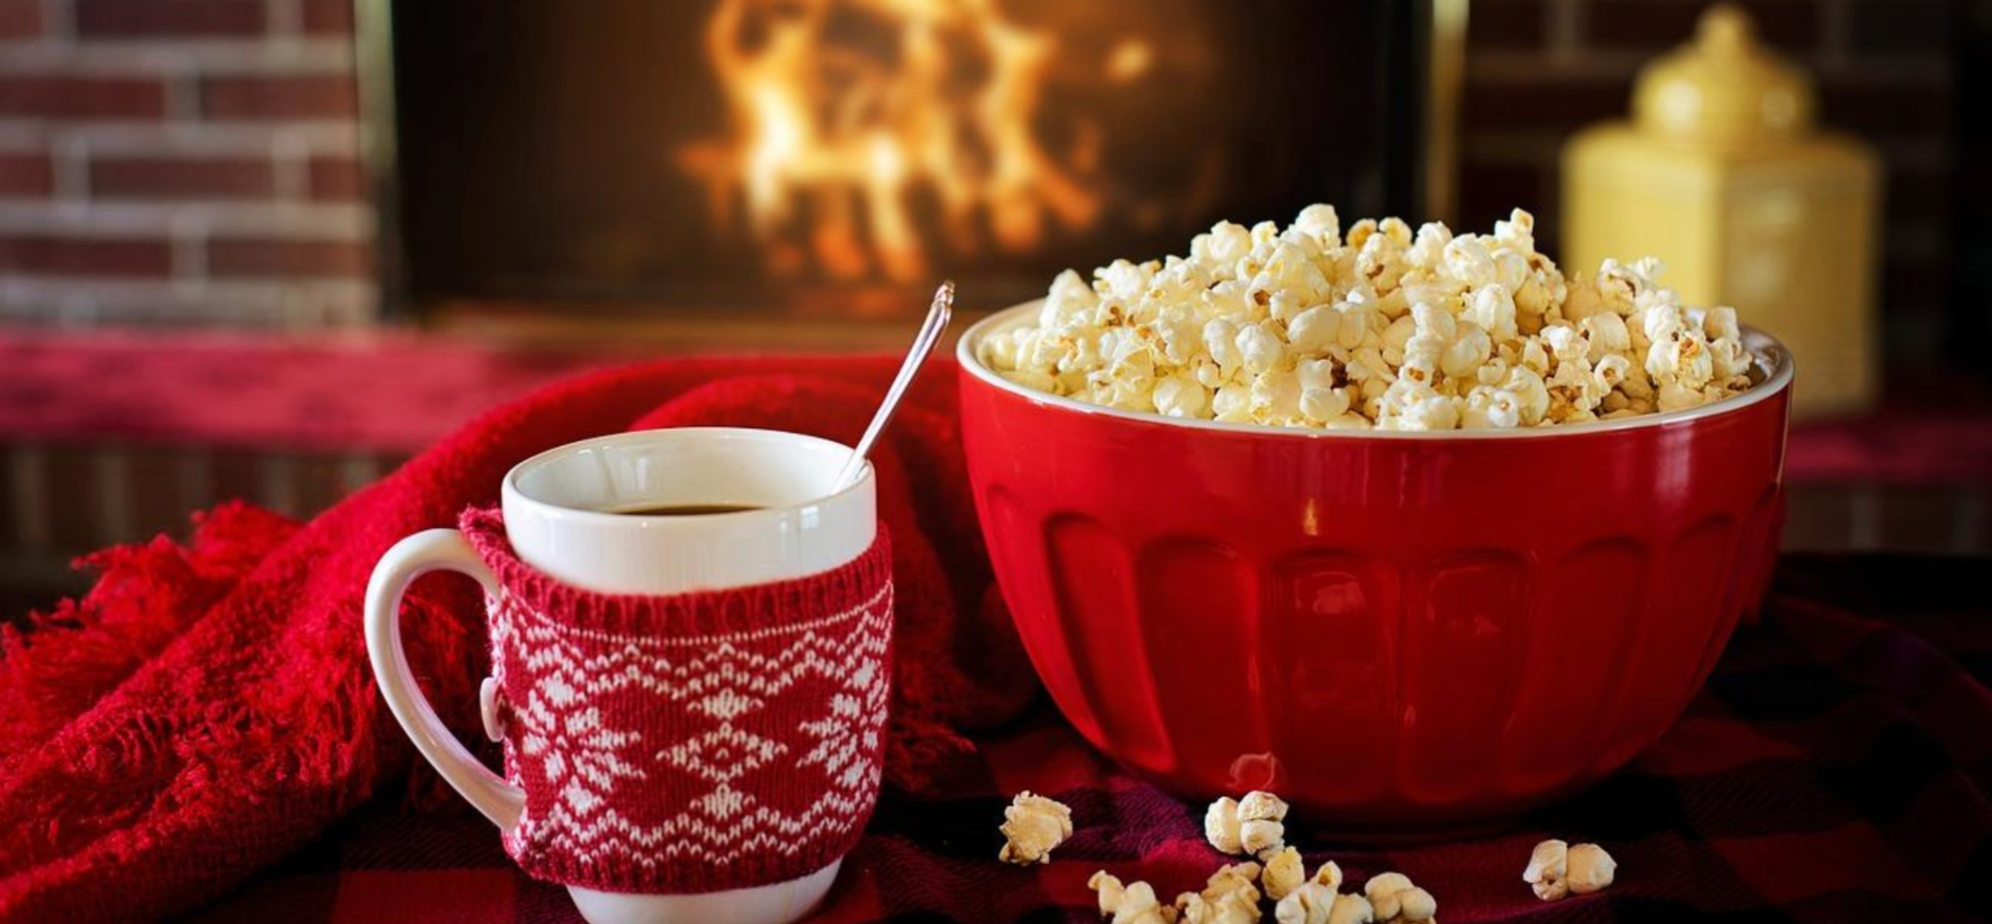 Christmas snacks, popcorn and coffee in front of a fire